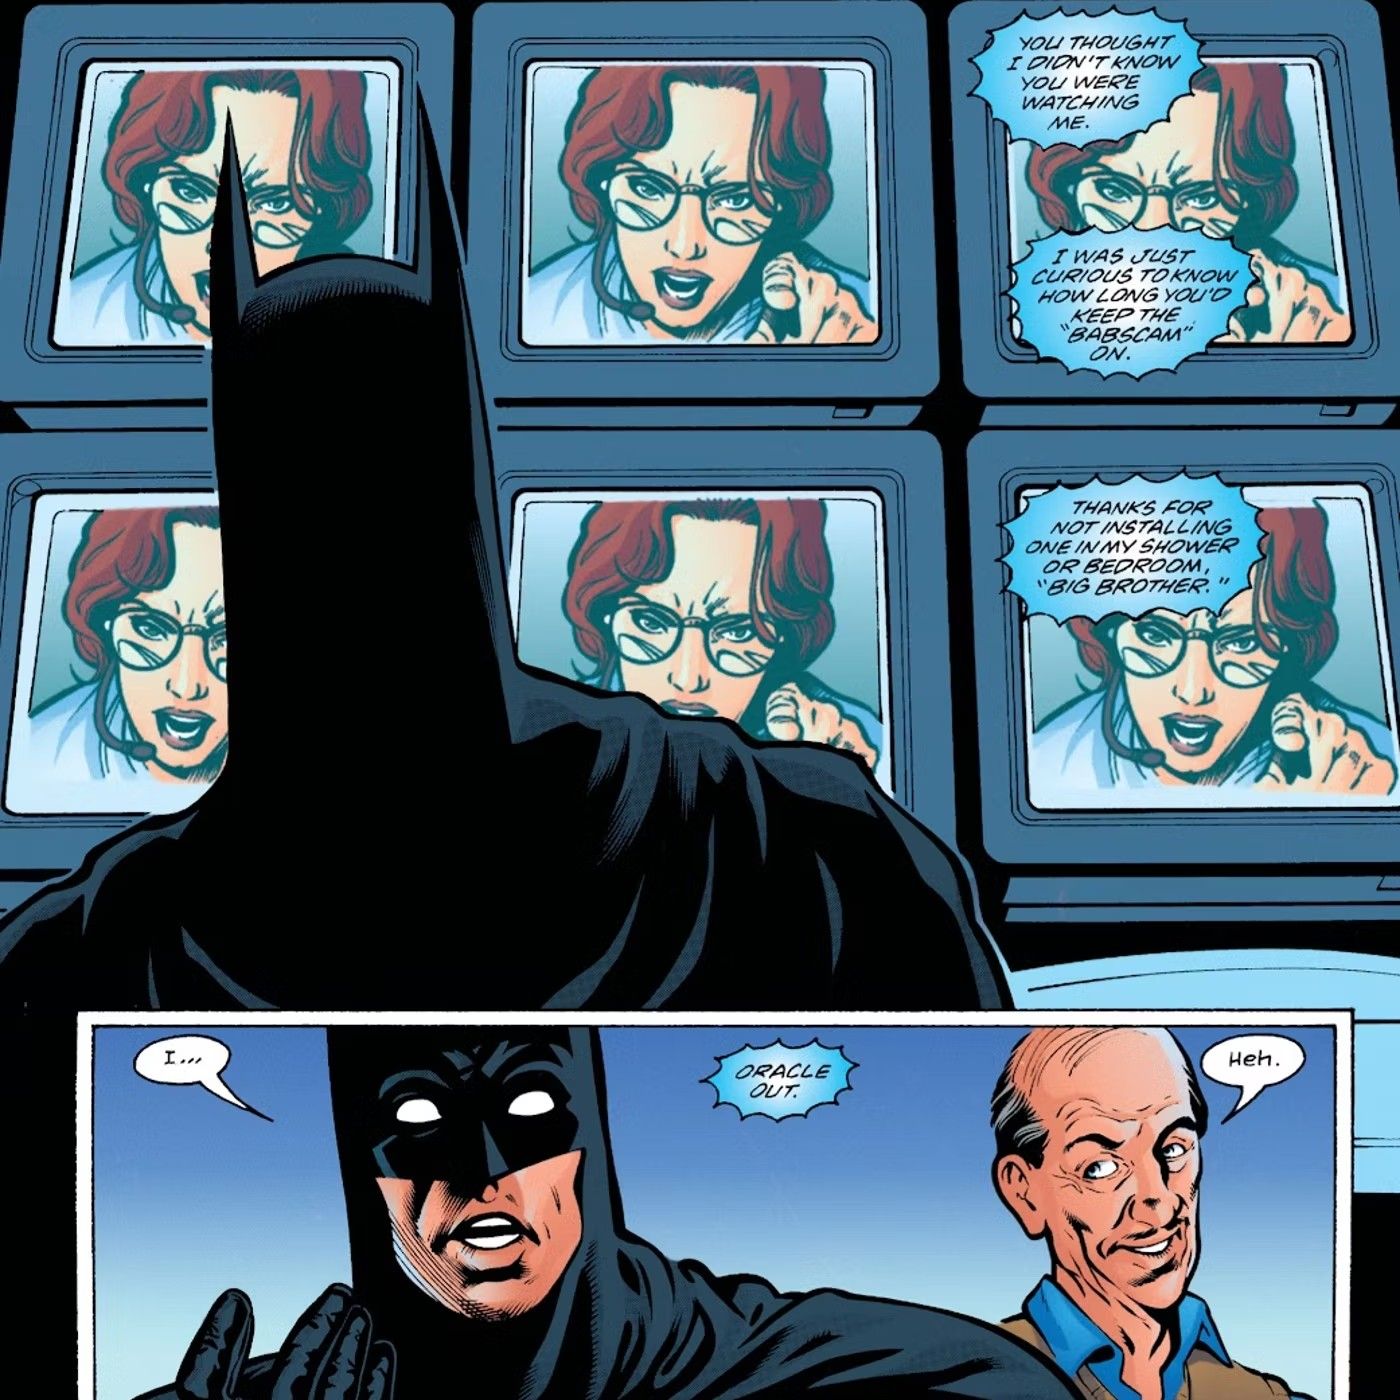 Comic book panels: Oracle scolds Batman from six screens while Alfred laughs.